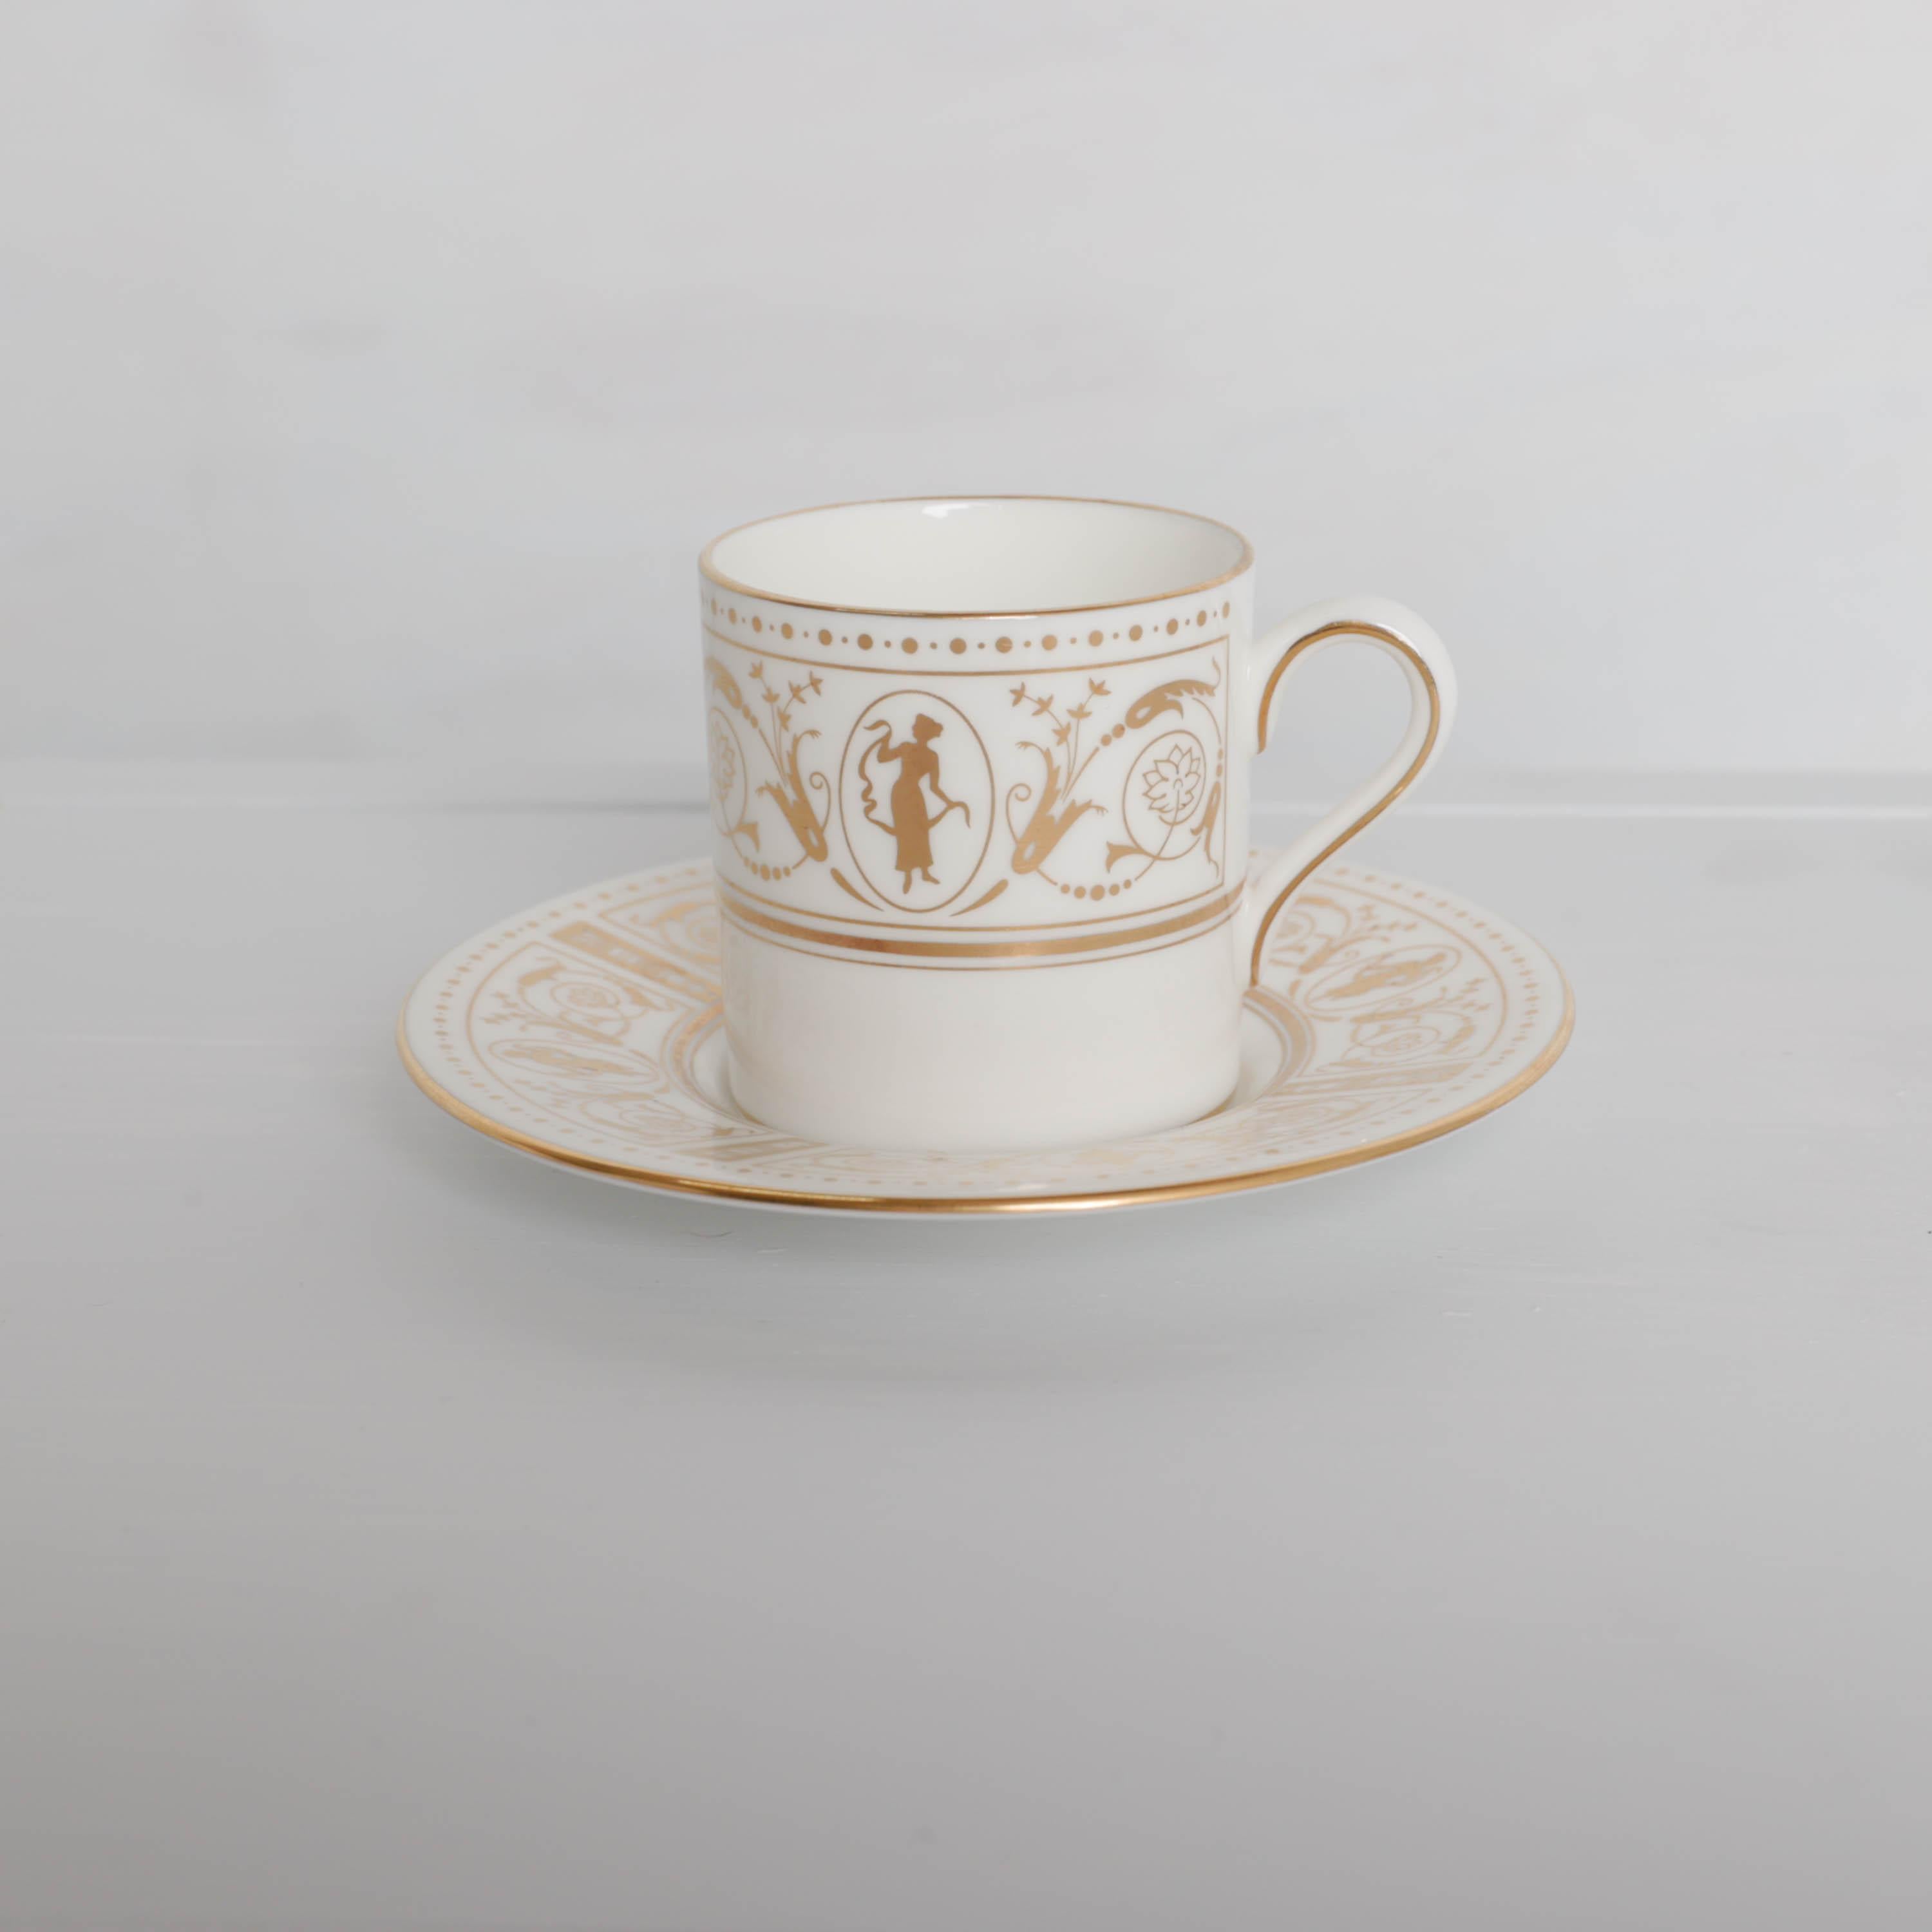 China Service for 12 Wedgewood Gold Grecian Circa 1964 For Sale 6